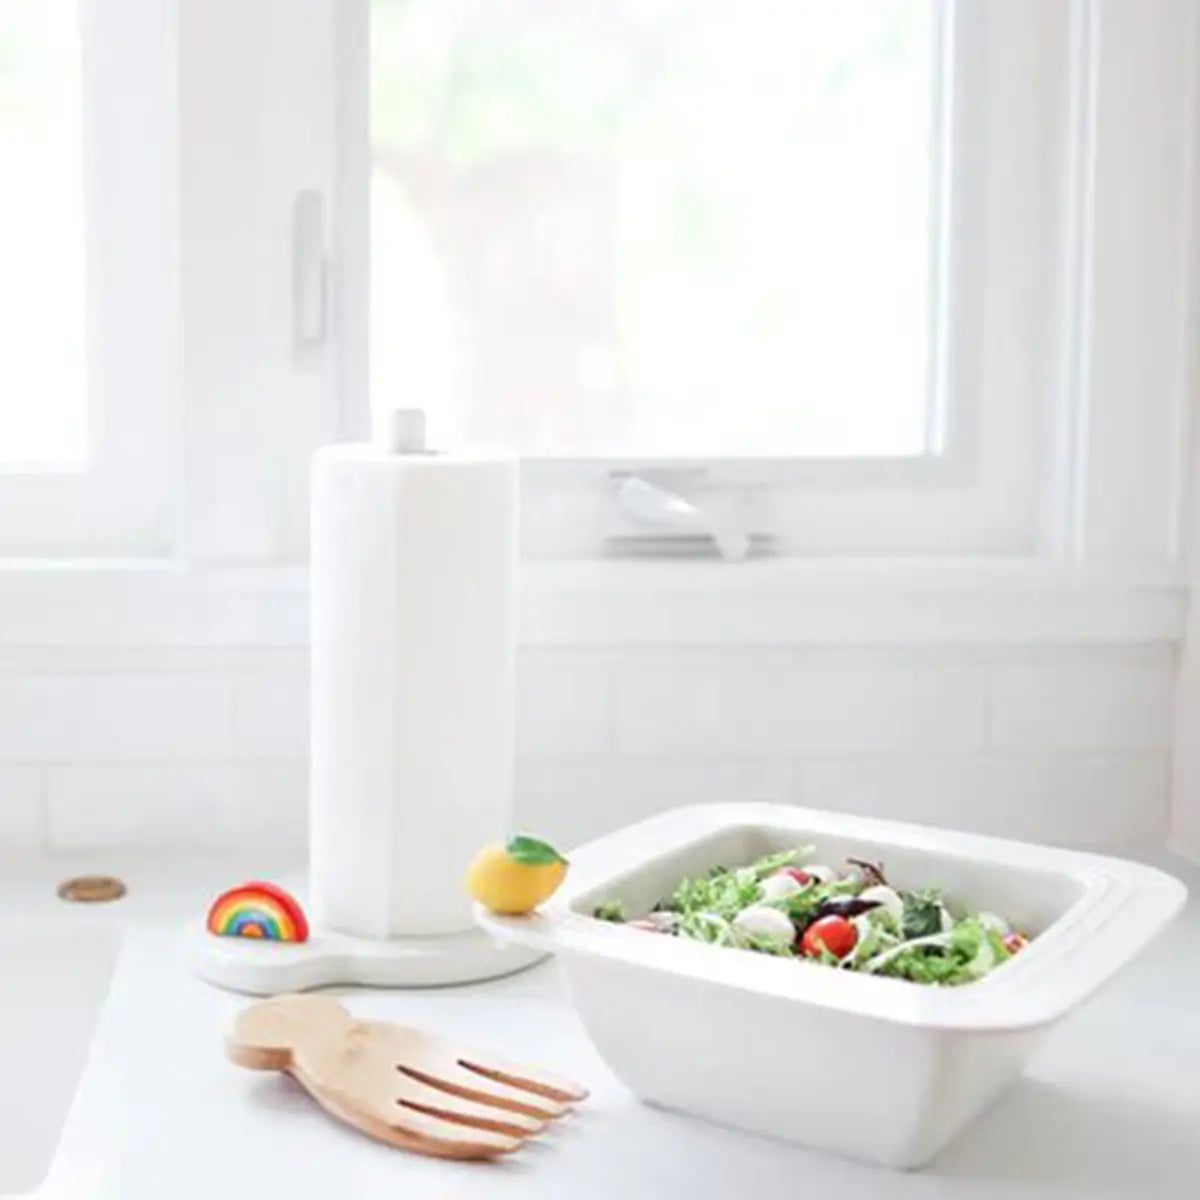 Nora Fleming Over the Rainbow Mini on a towel holder set next to a bowl of salad in the kitchen.